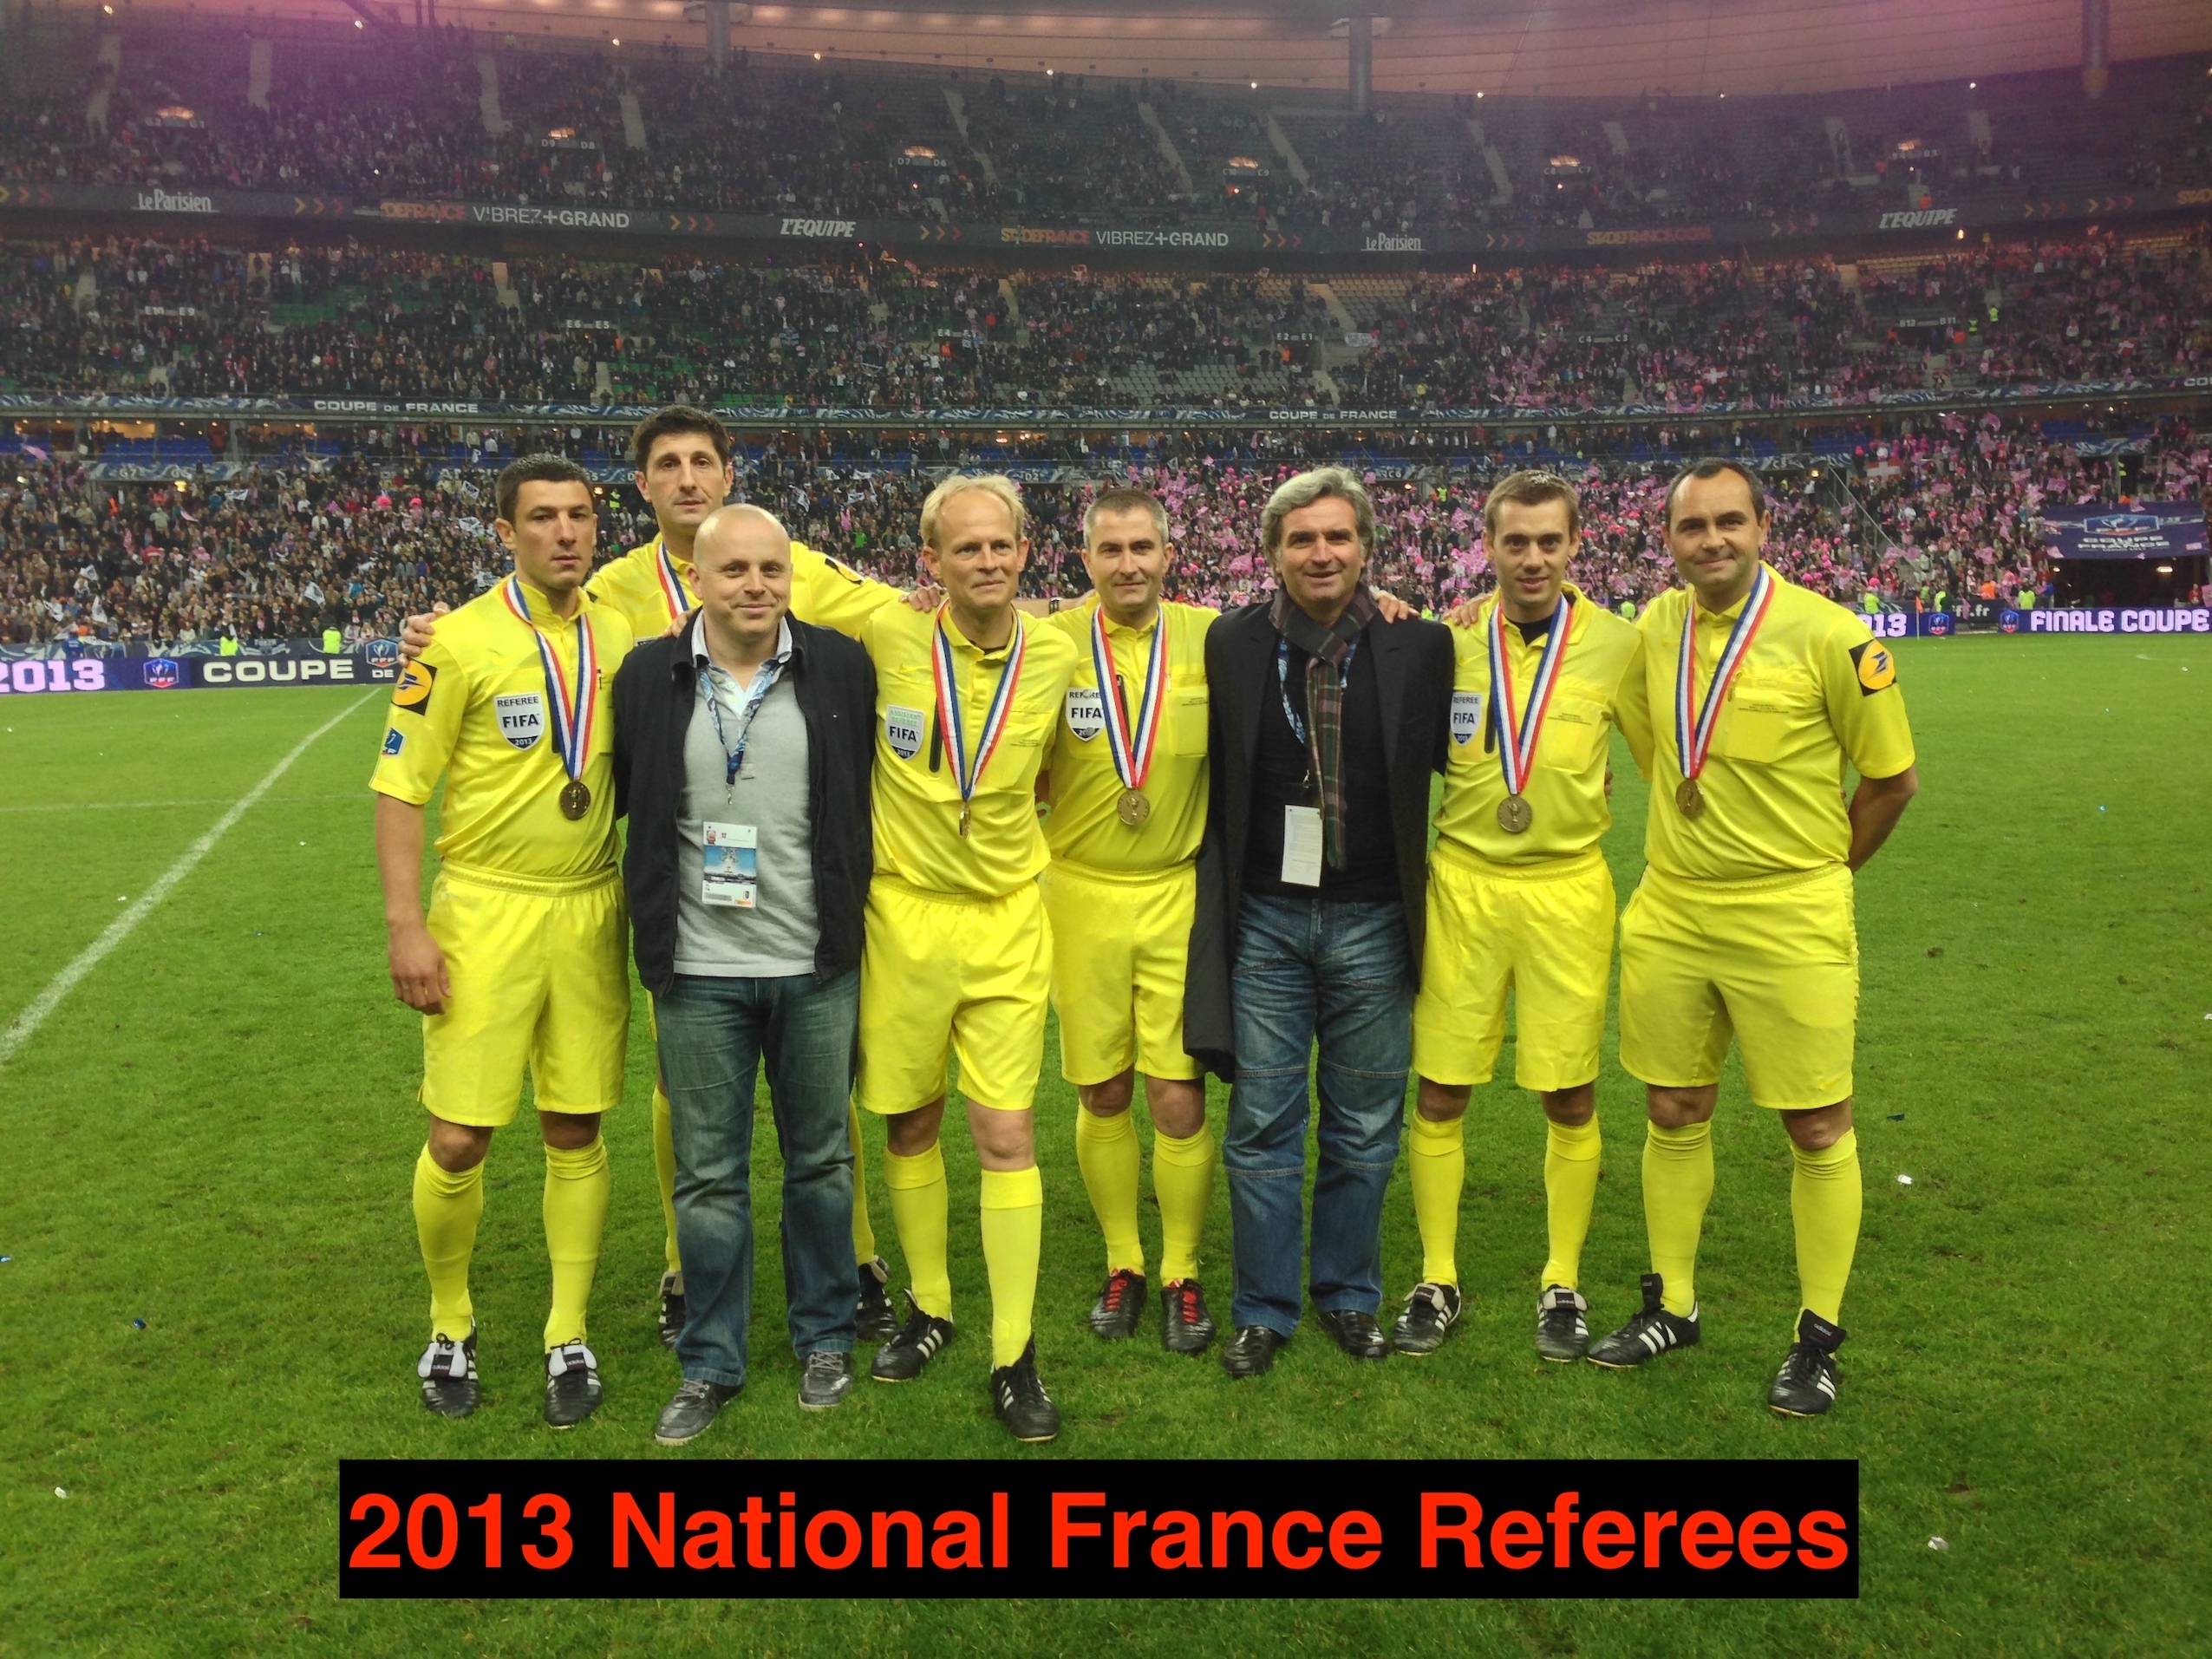 2013 National France Referees